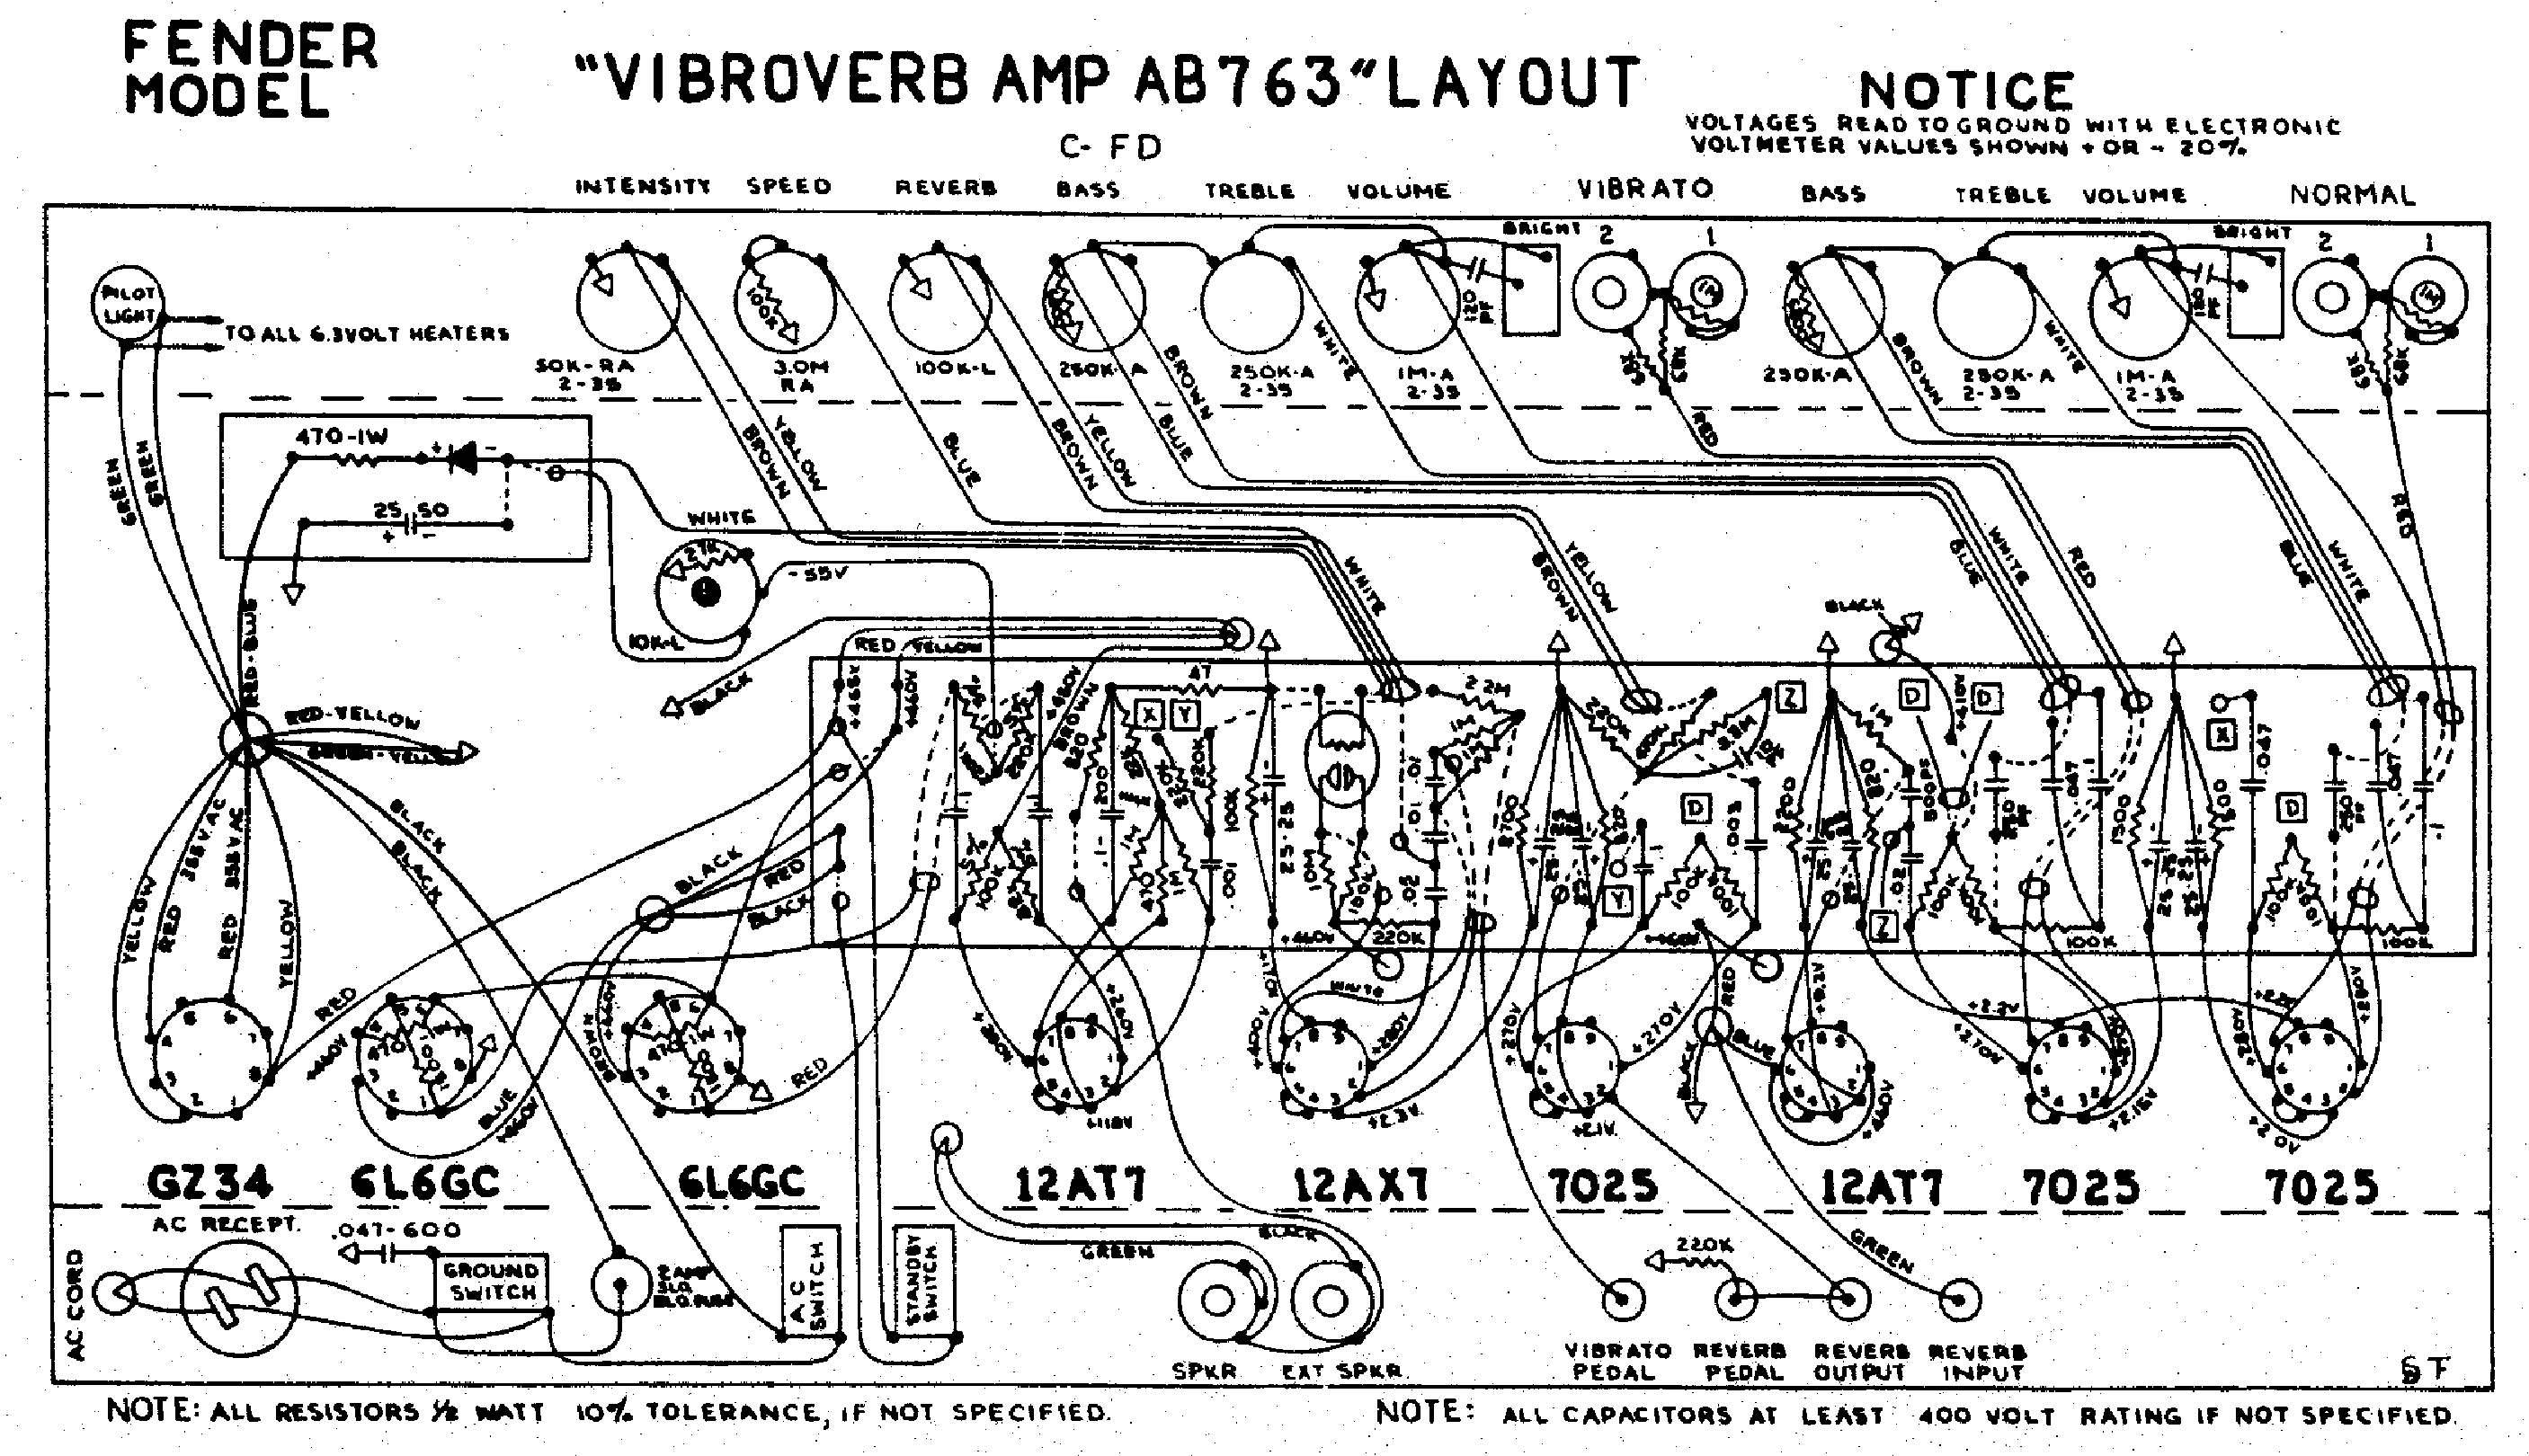 FENDER VIBROVERB-AB763-LAYOUT service manual (1st page)